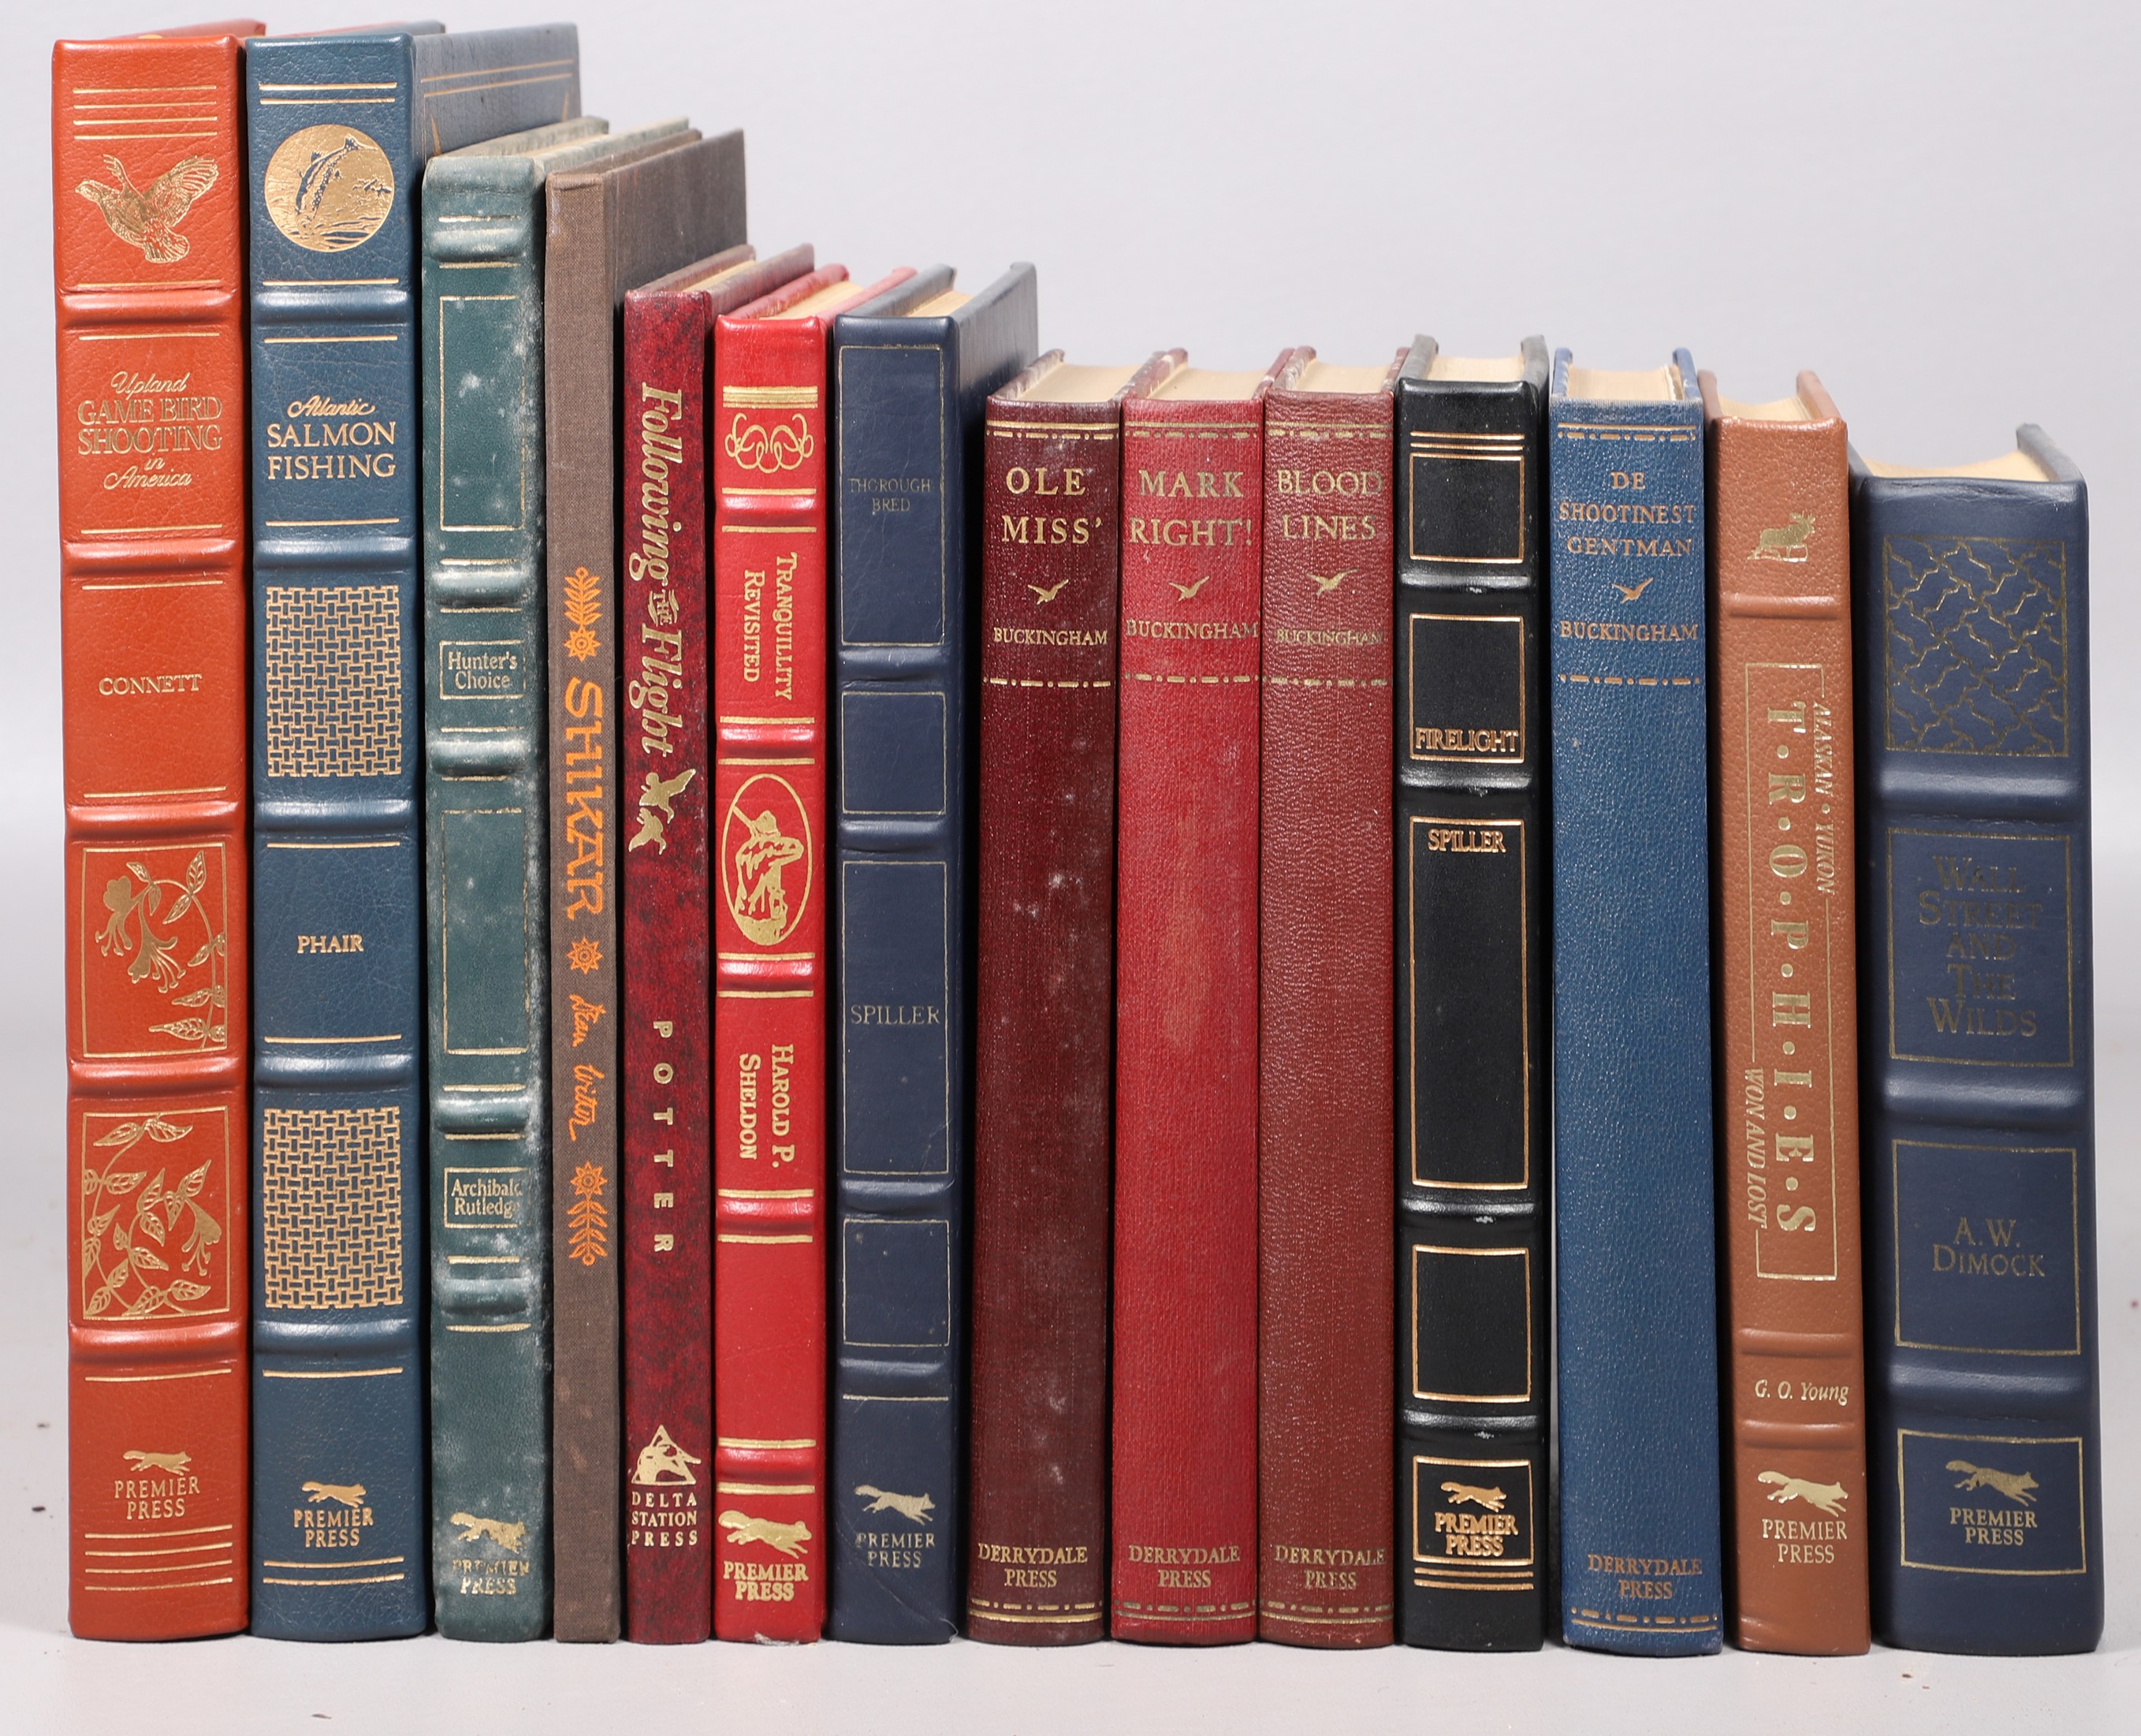 Fourteen books from the 20th century